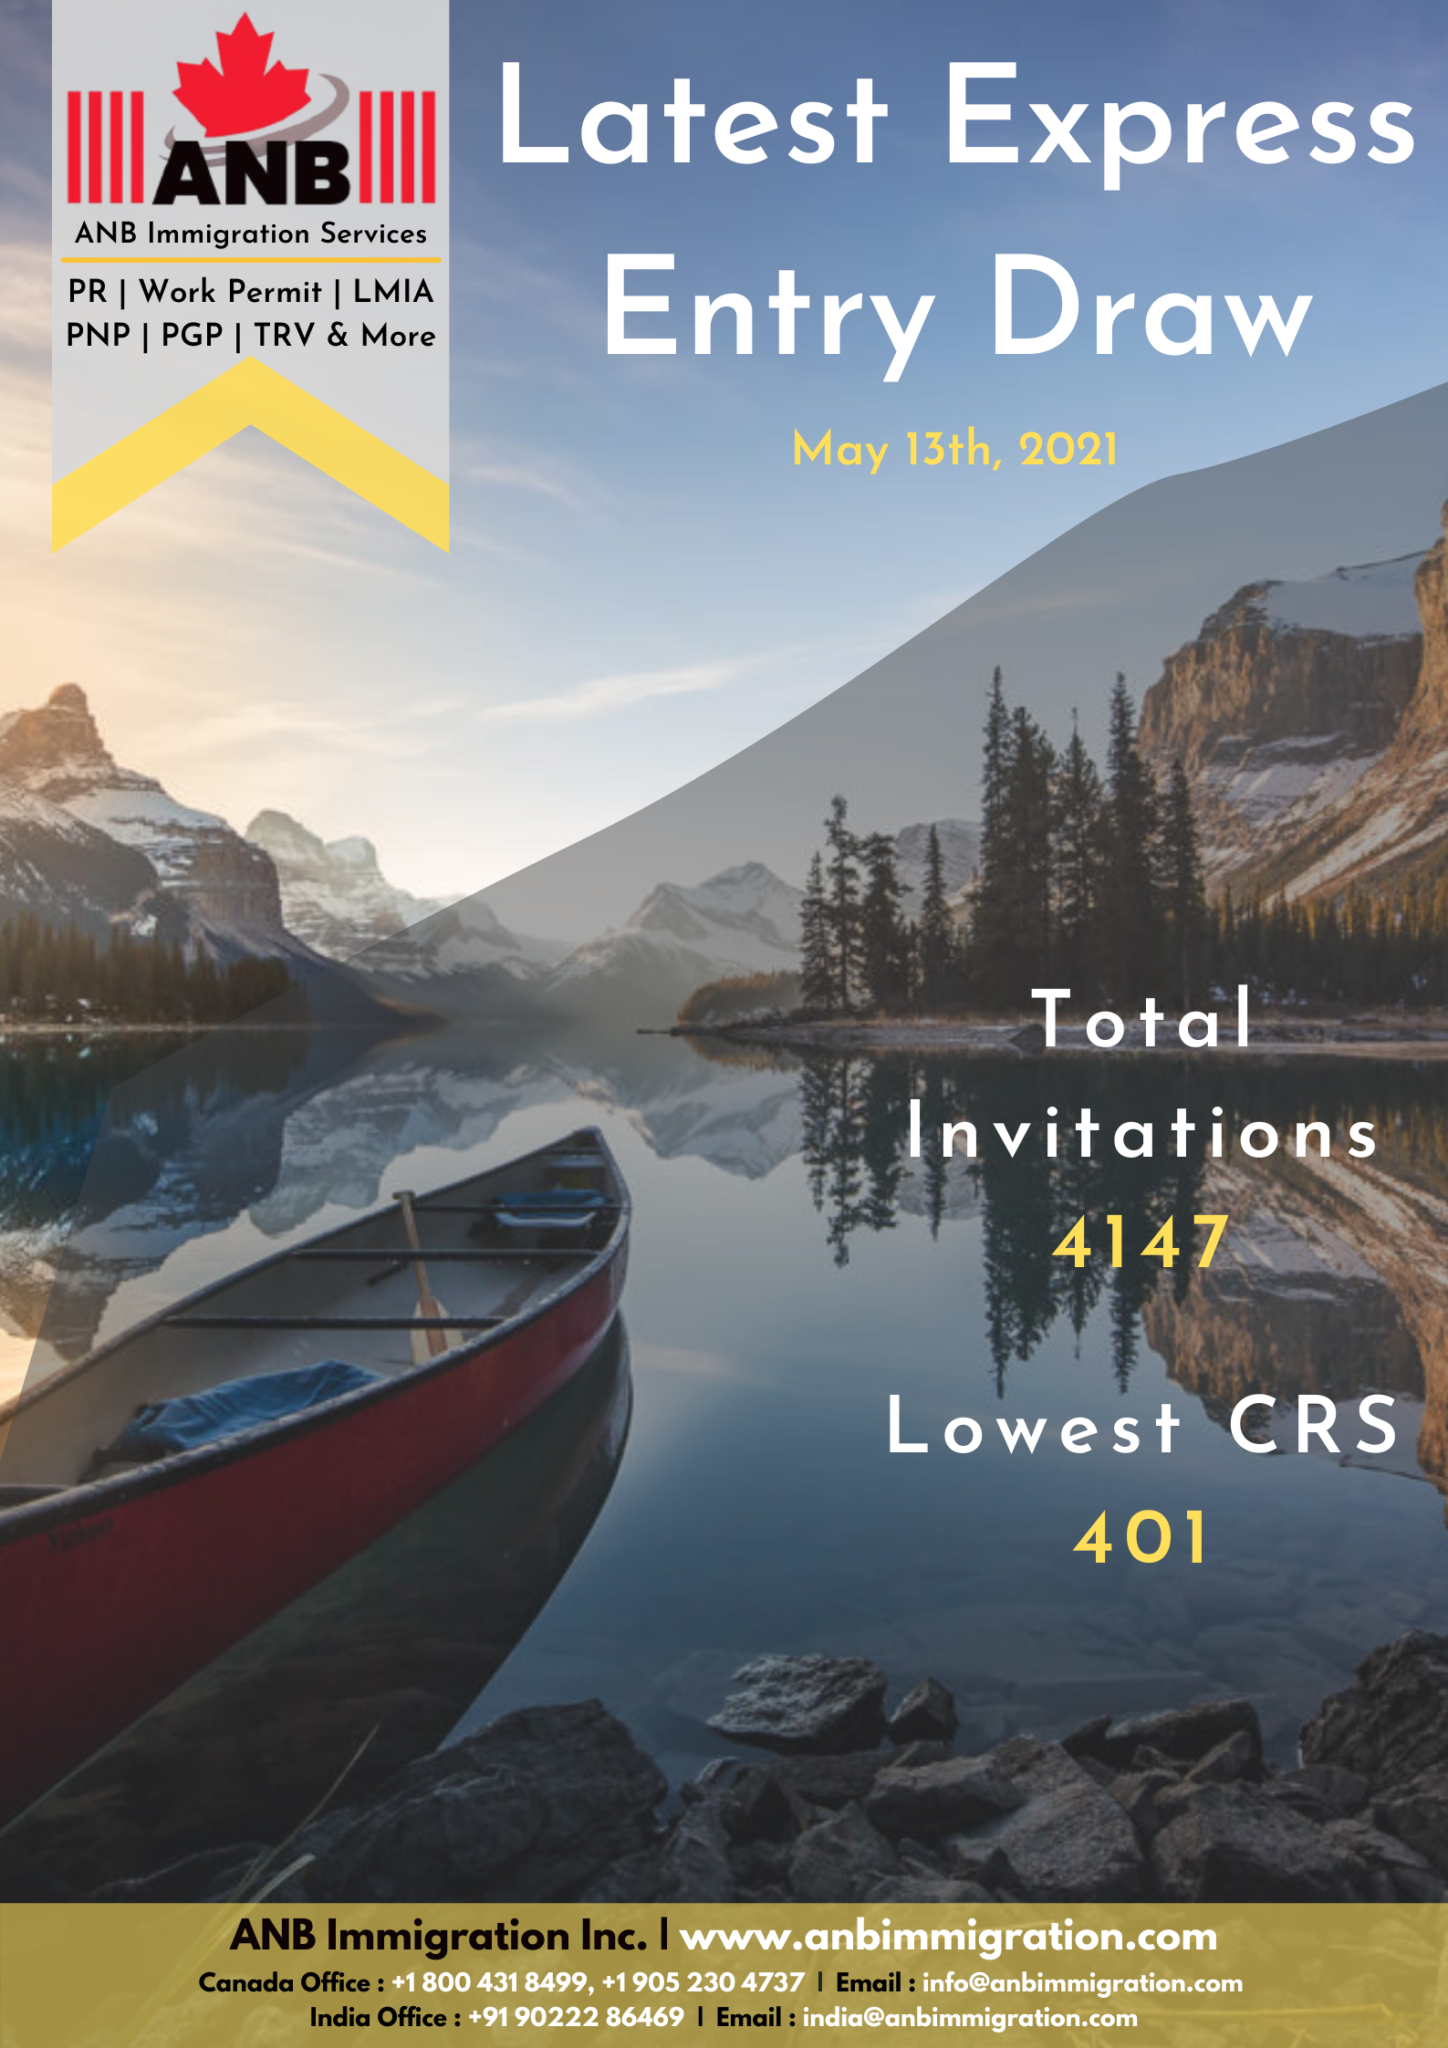 Express Entry CEC Draw 13th May 2021 ANB Immigration